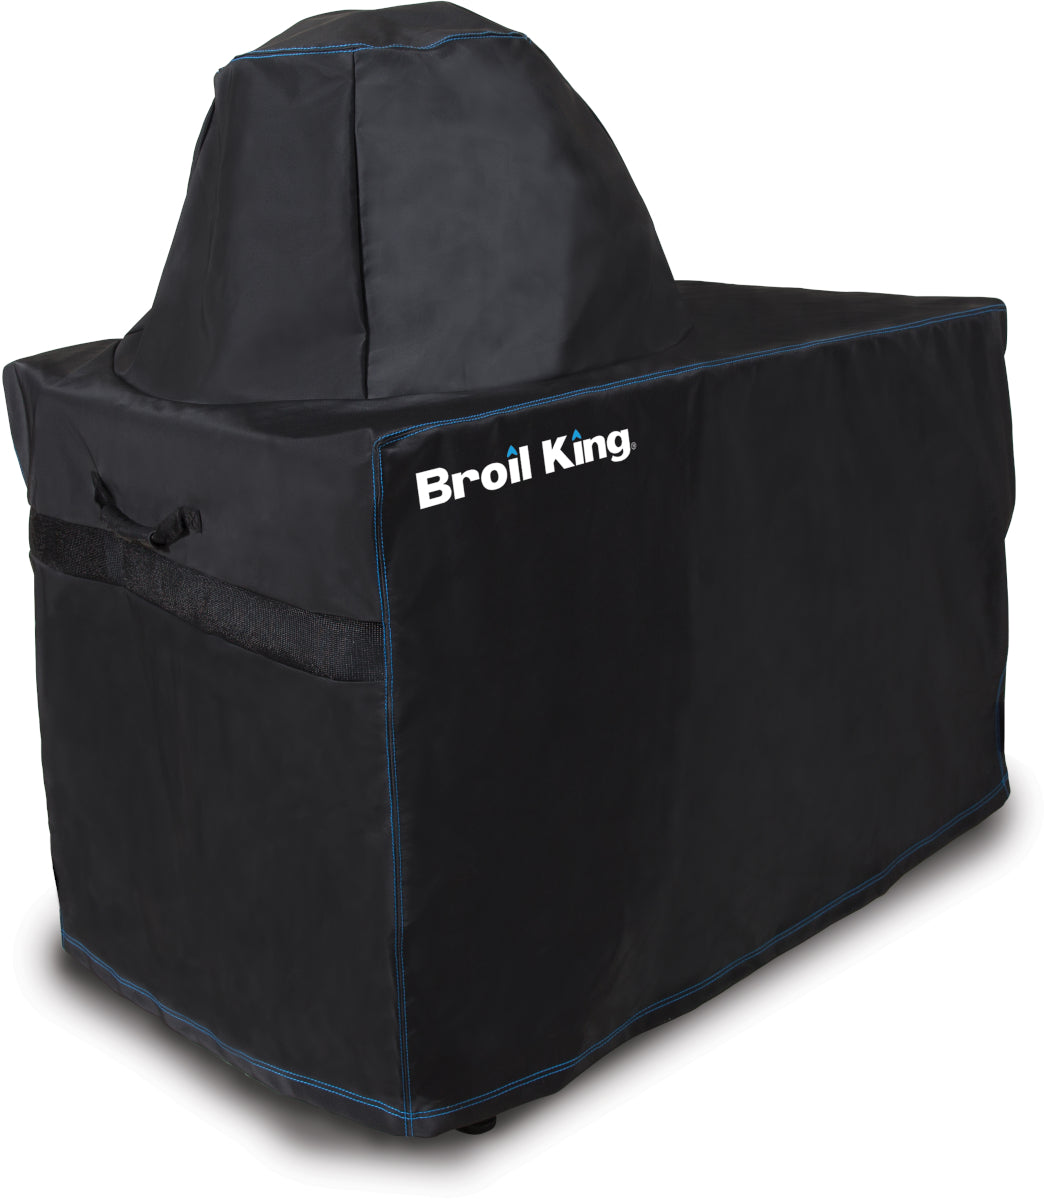 Broil King Select KEG Cart Cover (Fits the Cart with the KEG in place)